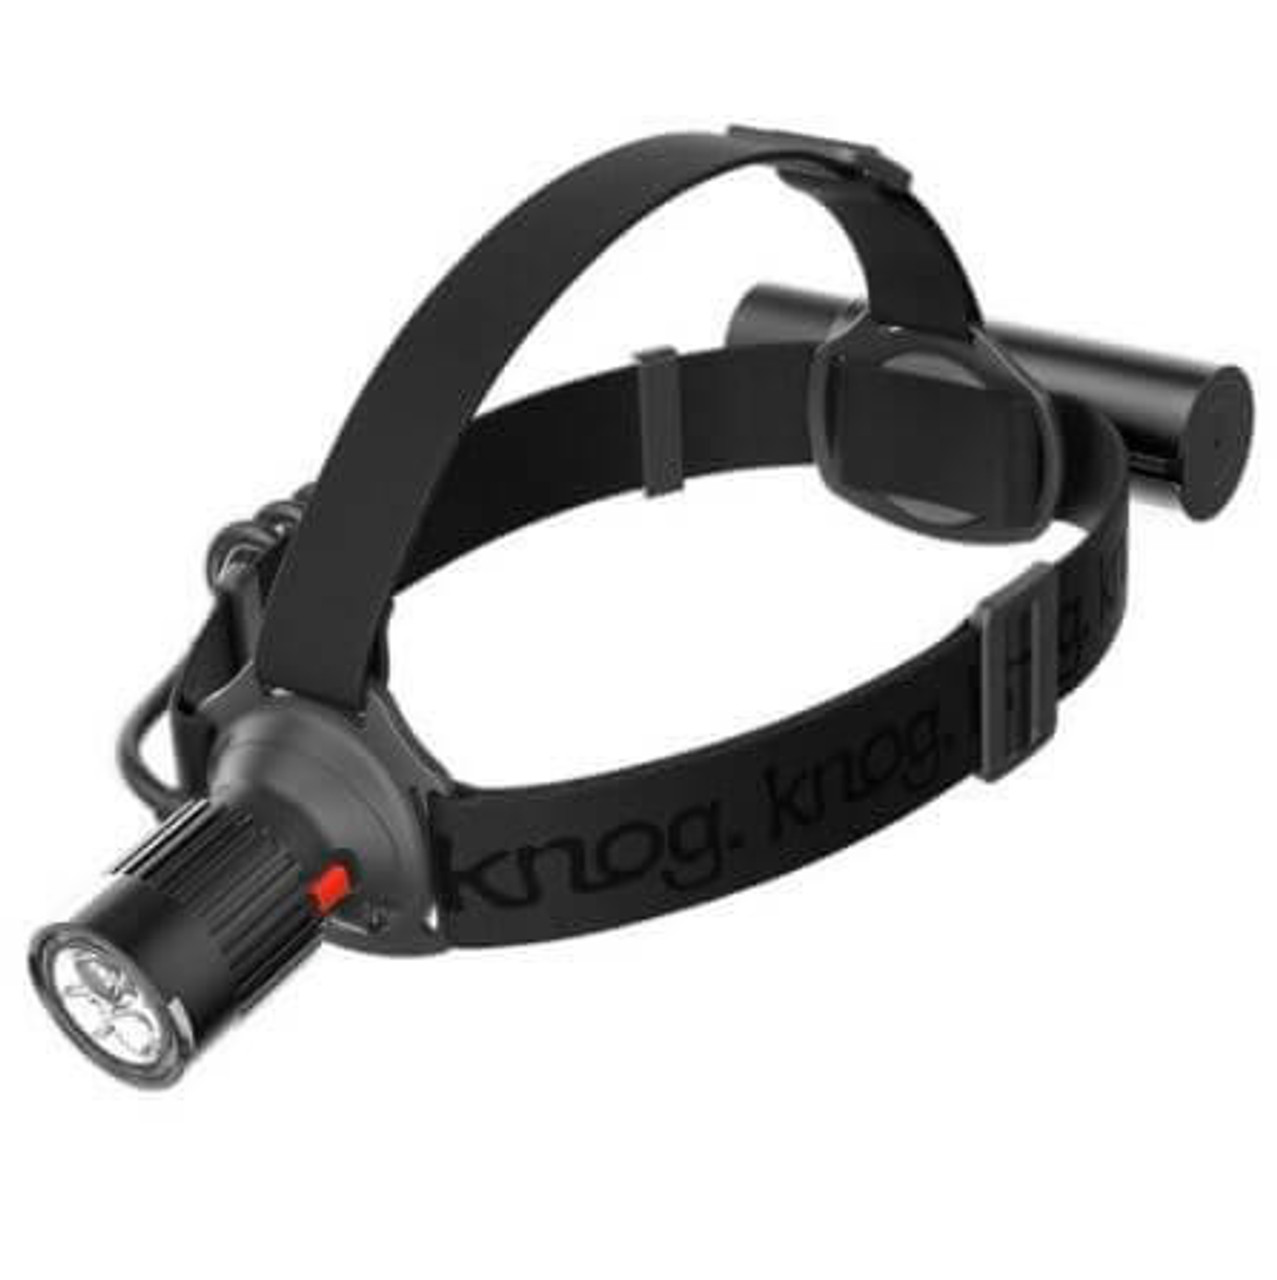 Knog Pwr 1000 Lumen Headtorch With Small Battery 3350Mah